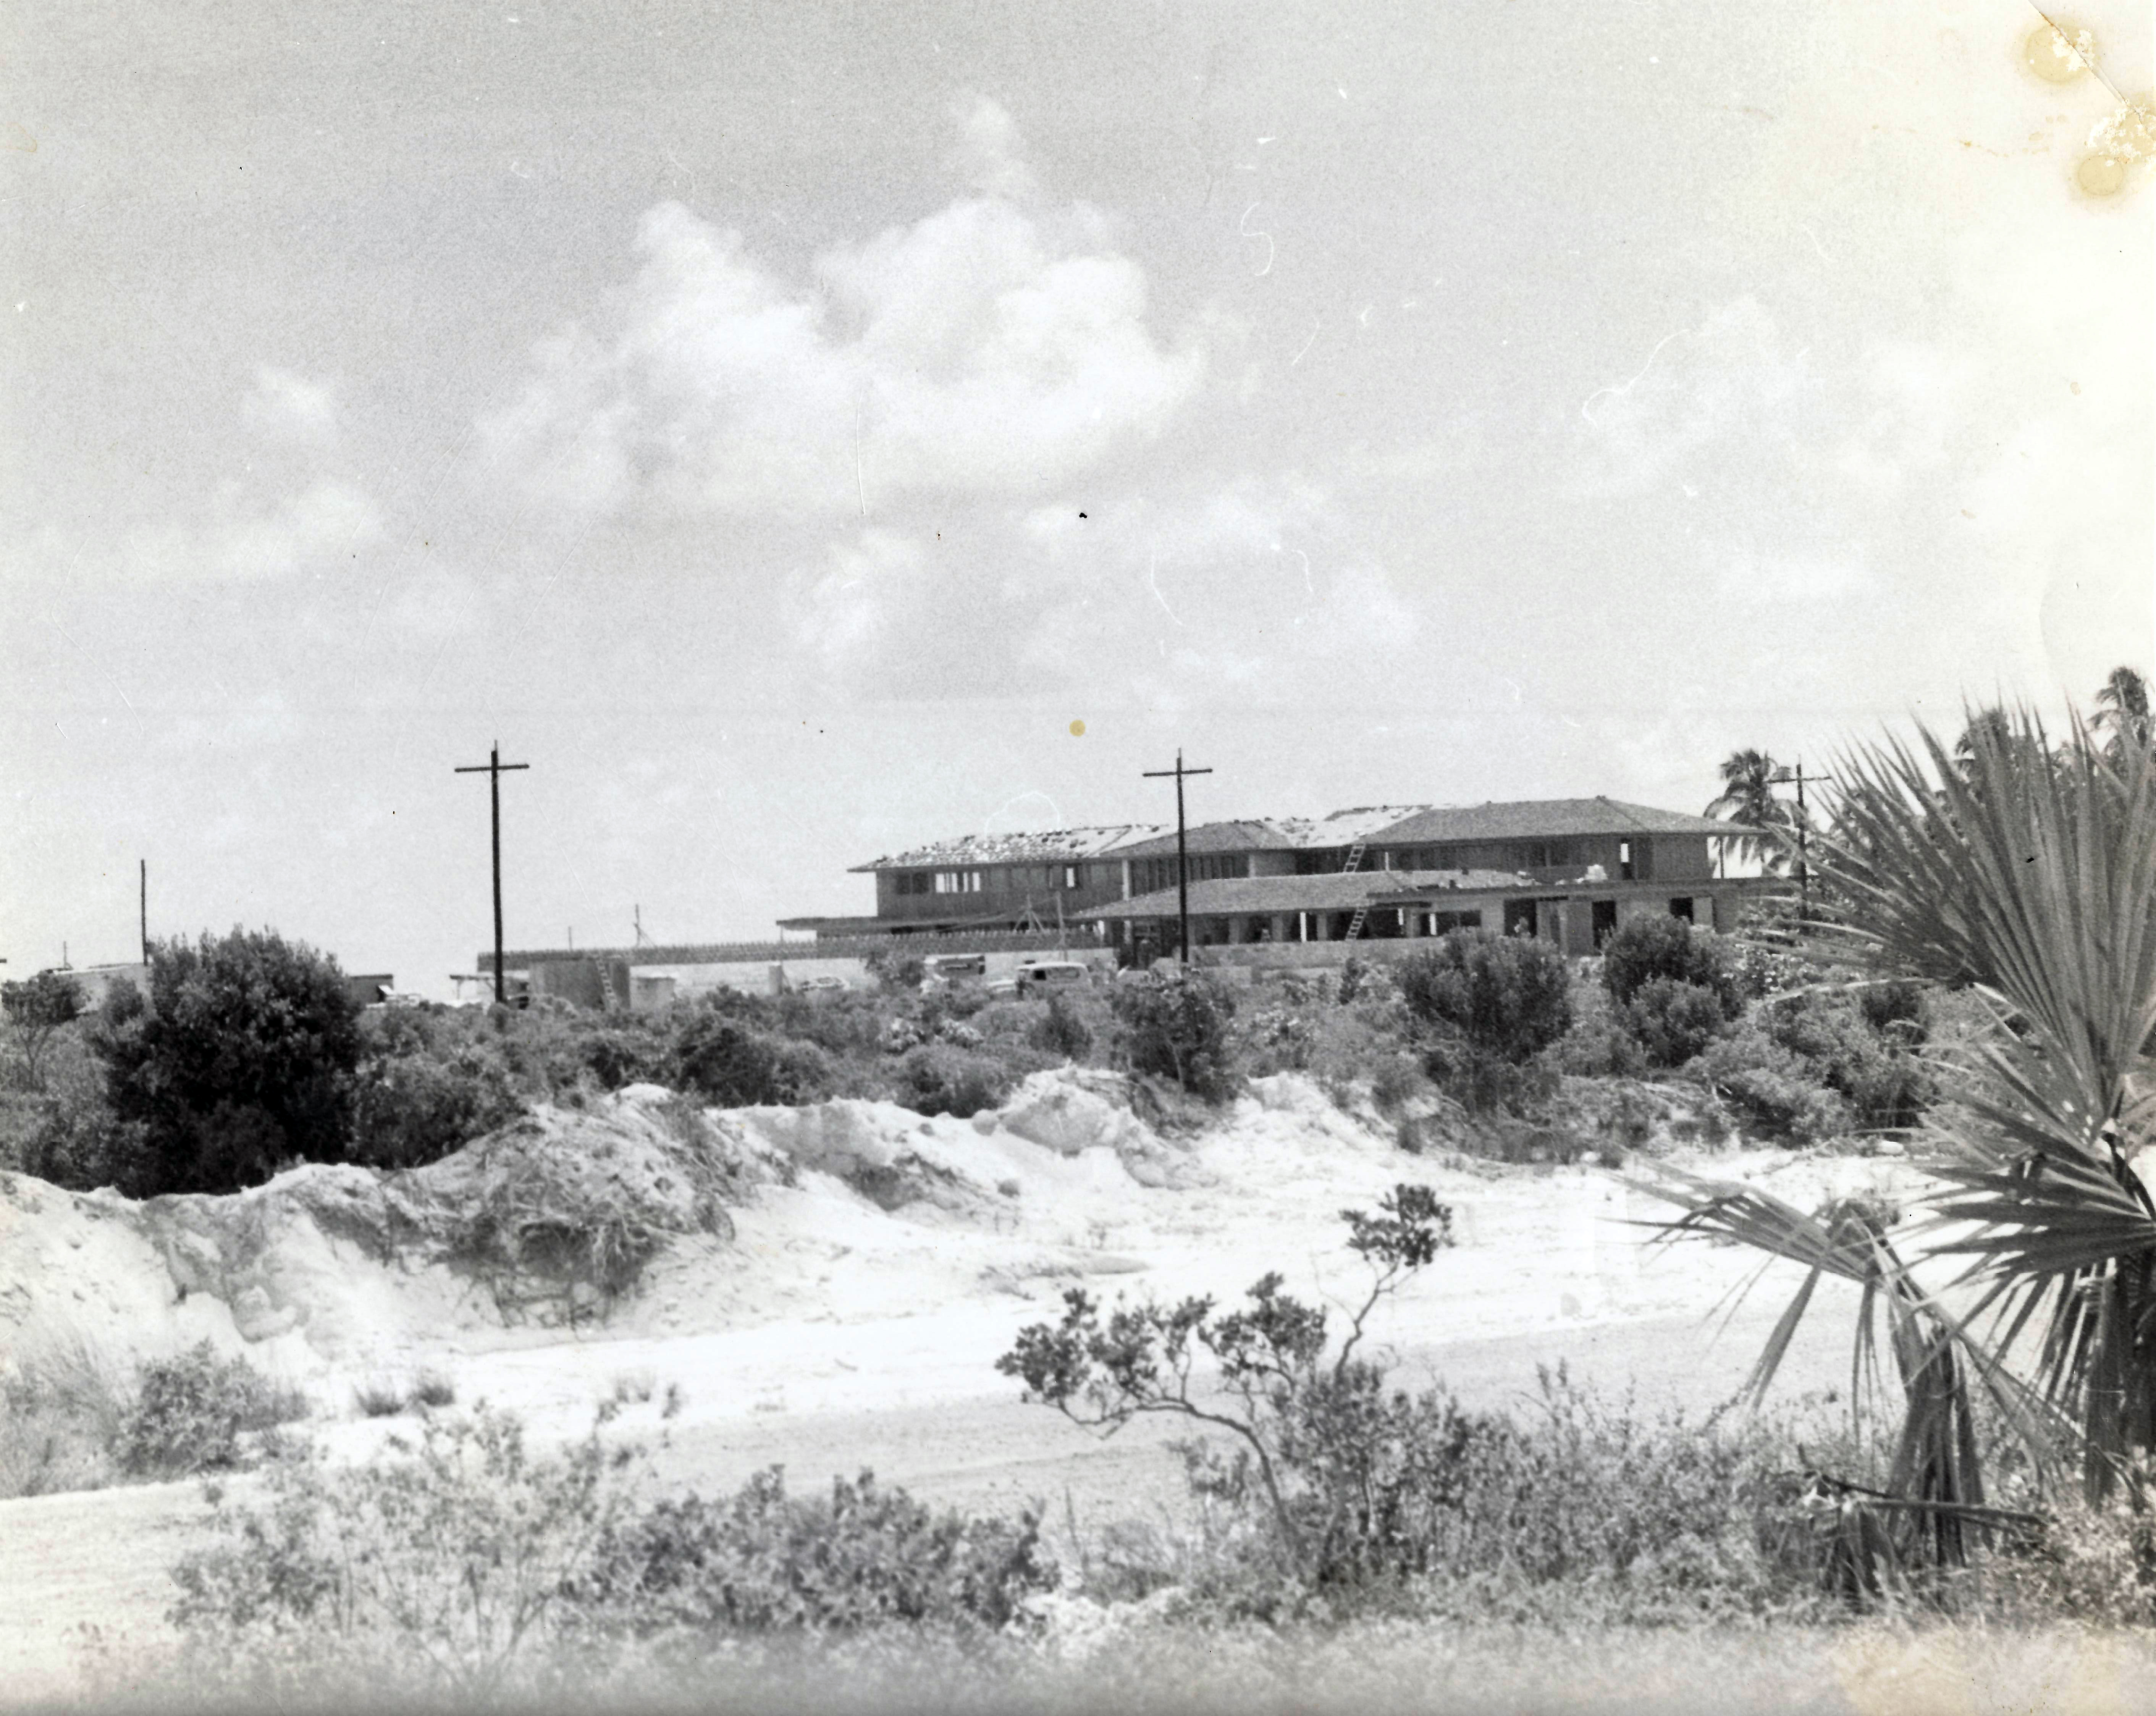 Wallace Groves' home under construction on Lucayan Beach, 1960's